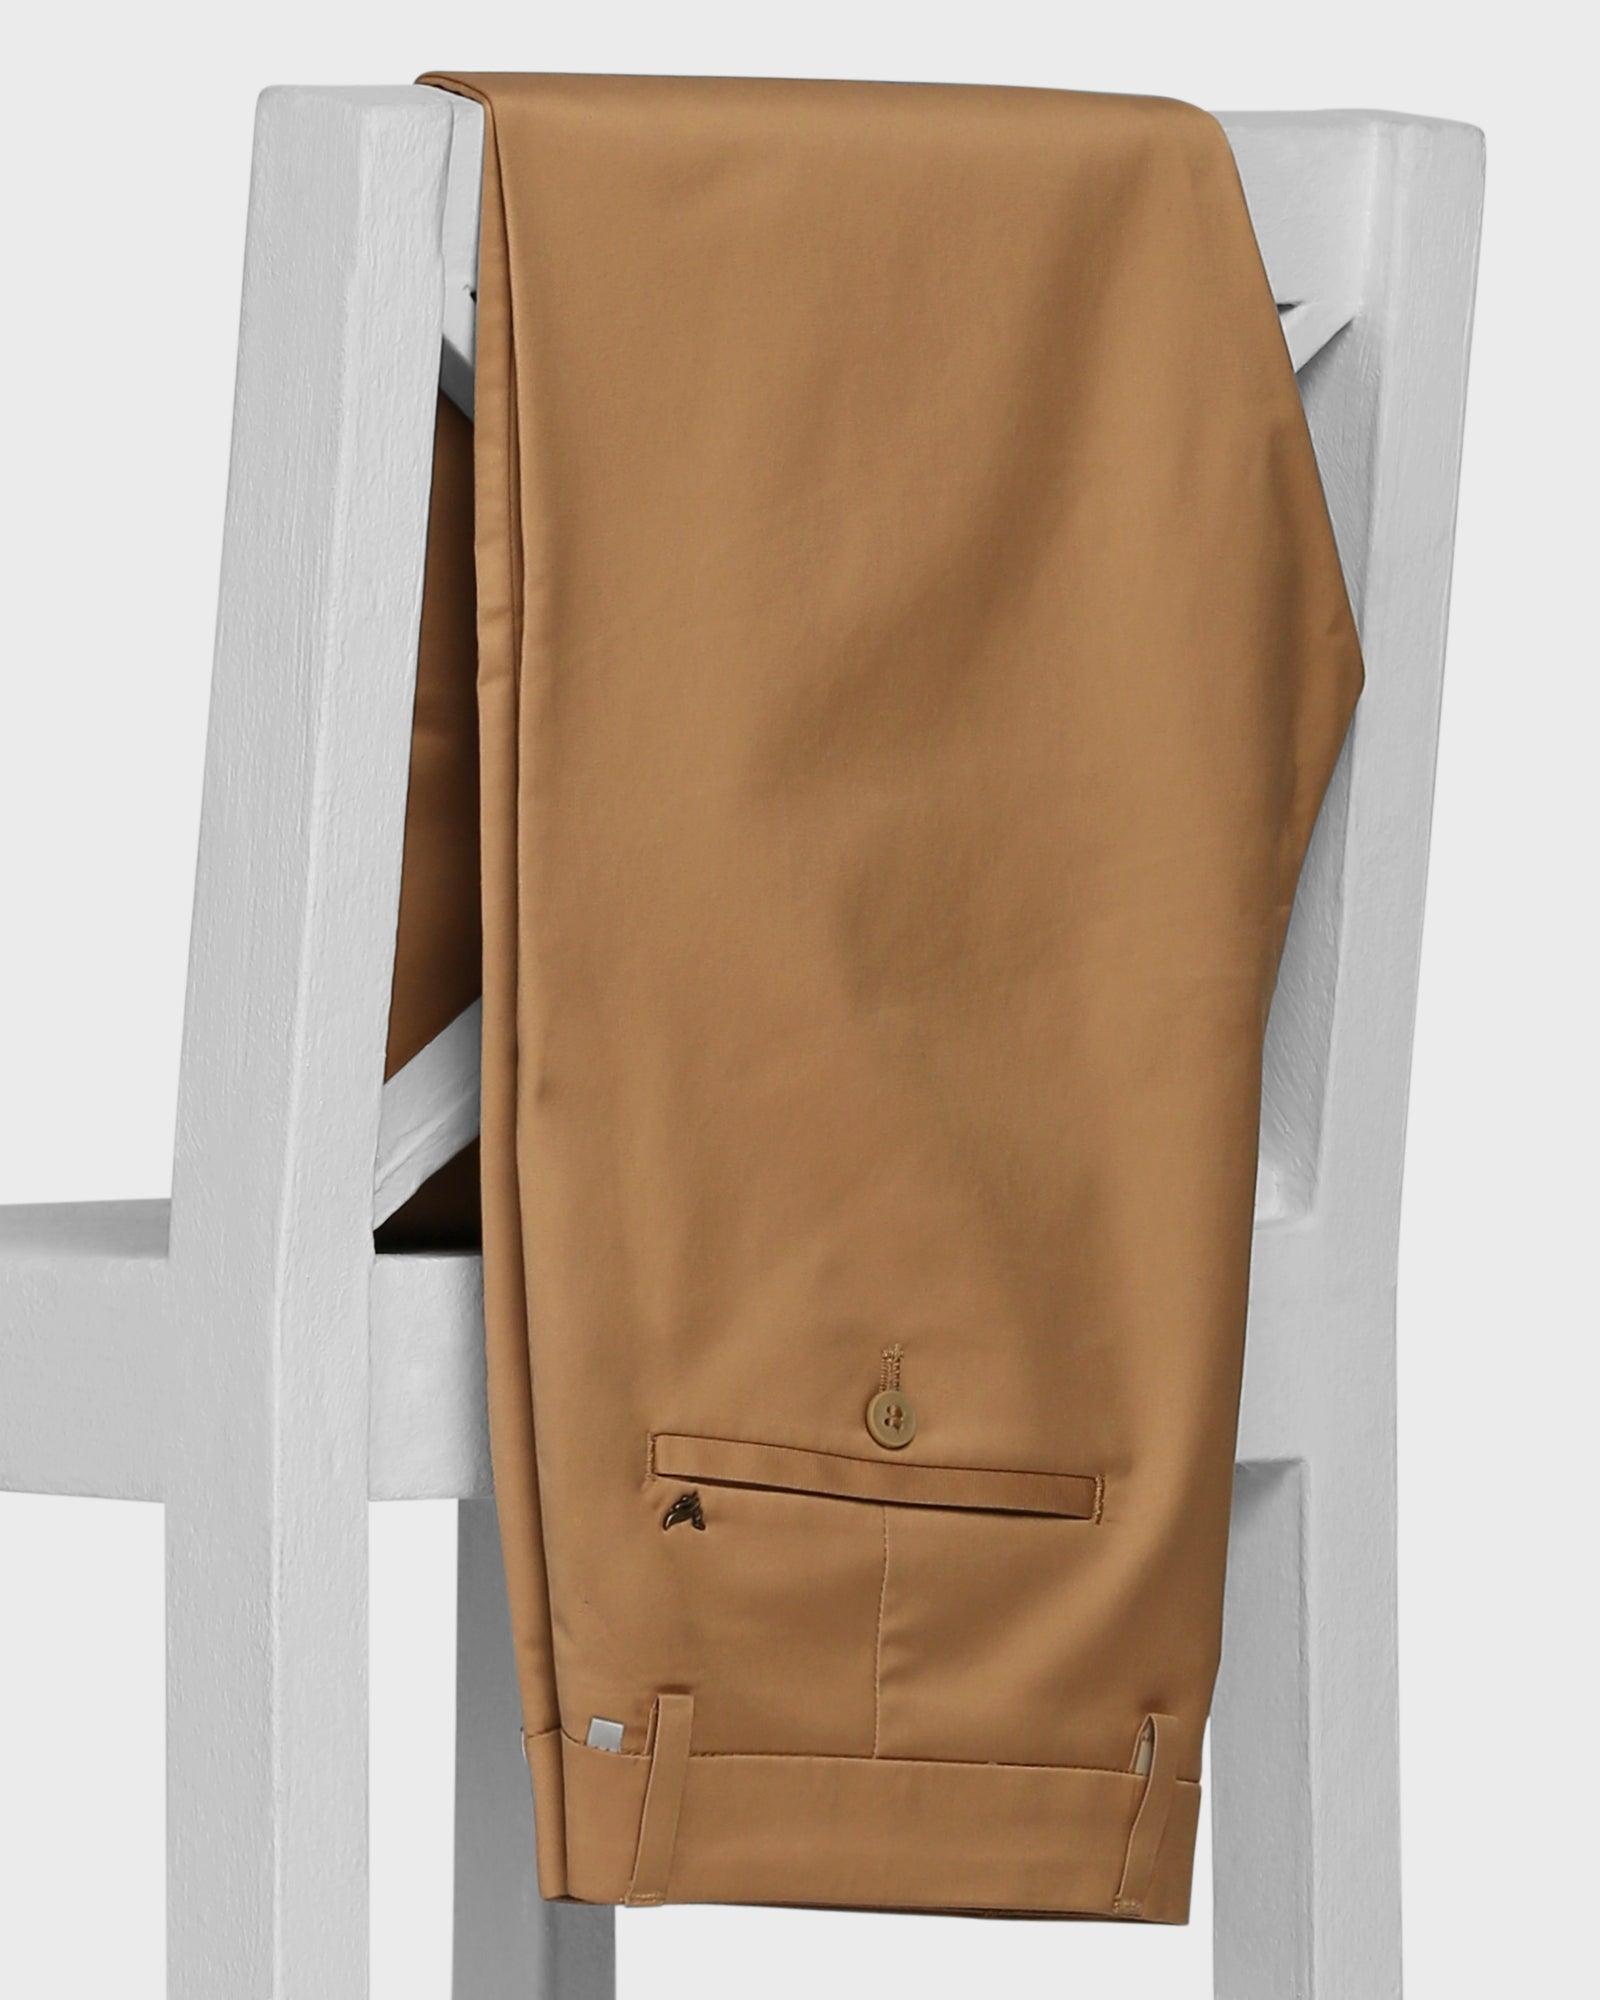 TechPro Slim Fit B-91 Casual Tan Solid Khakis - Nord